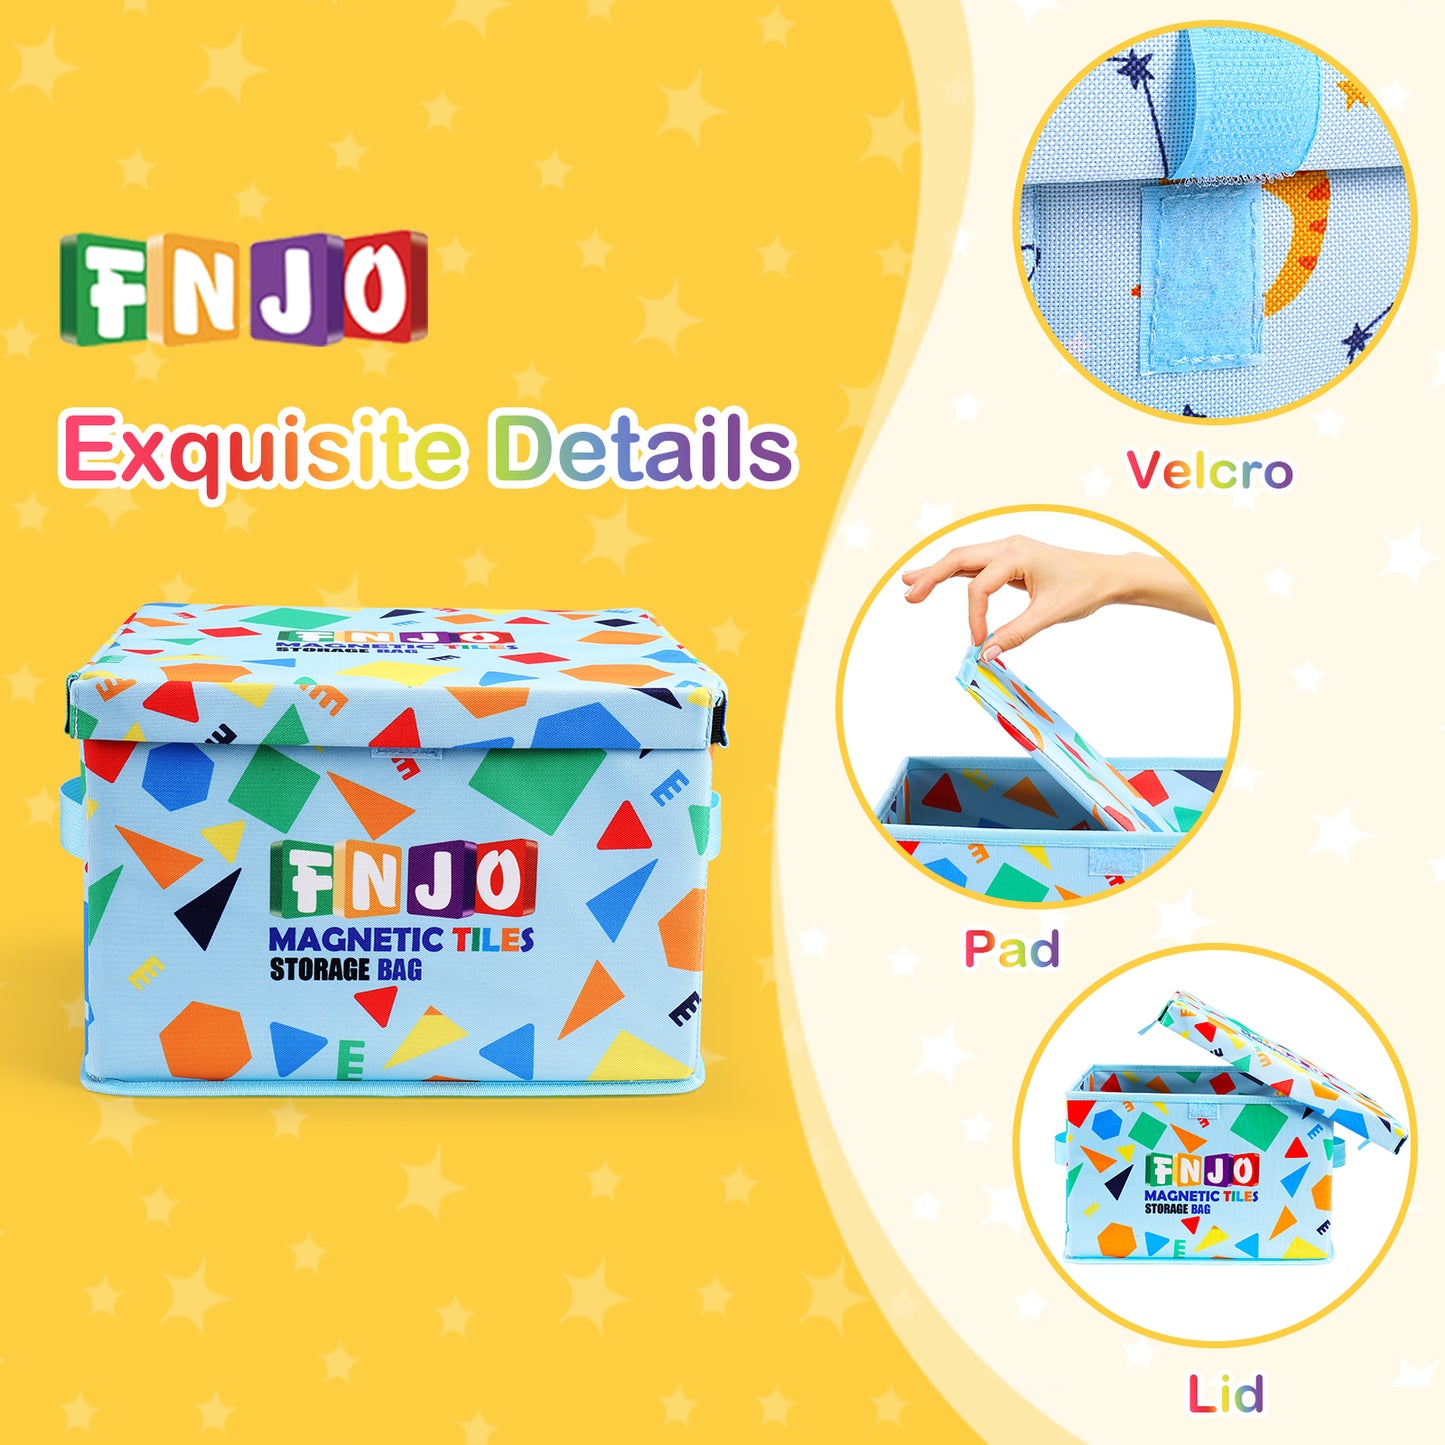 Toy Storage Bin,Foldable Toy Organizer with Lid, Playroom Organizer,Toy Holder,Storage Box for Magnetic Tiles,Play Figure